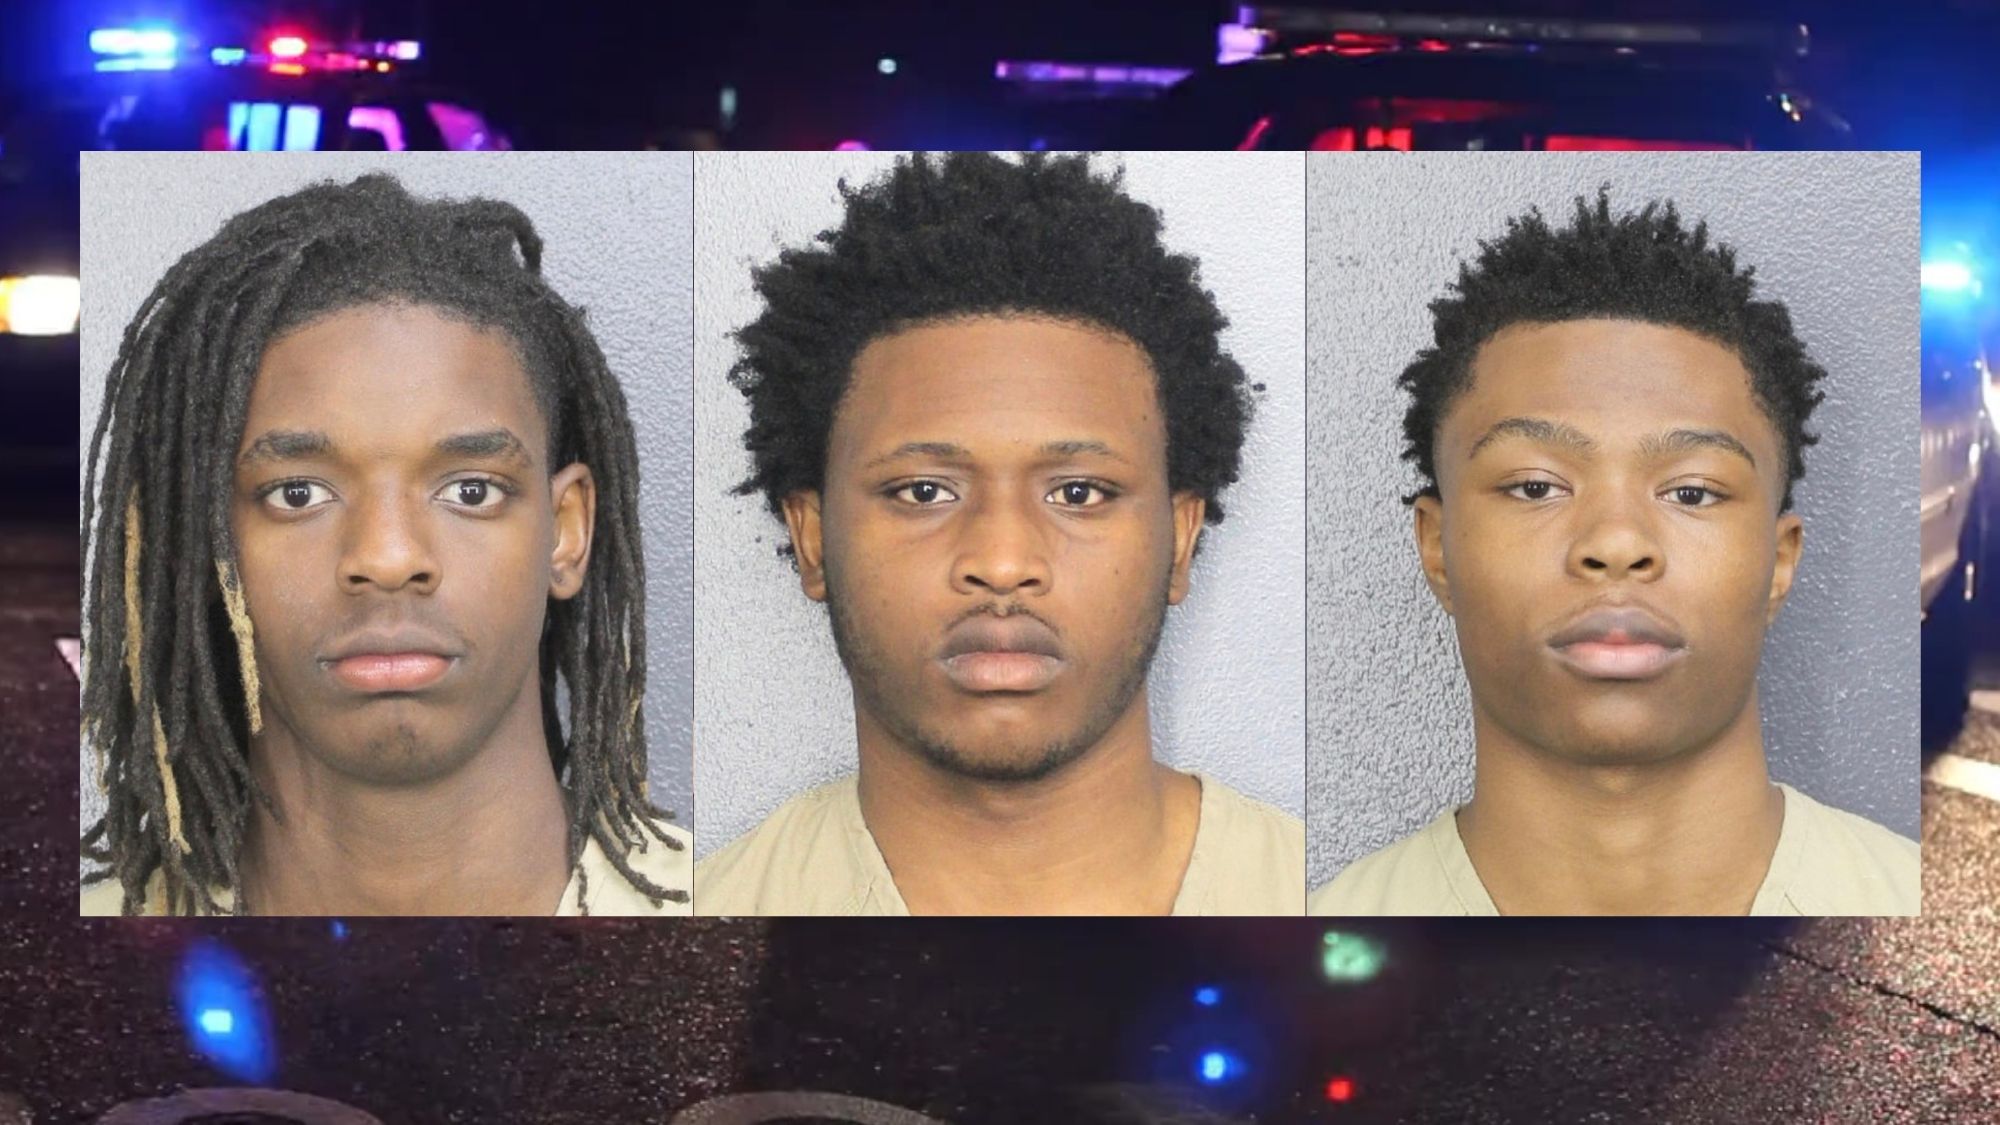 Trio of Teens Arrested for Vehicle Burglaries in Parkland Thanks to Alert Resident, High-Tech Surveillance